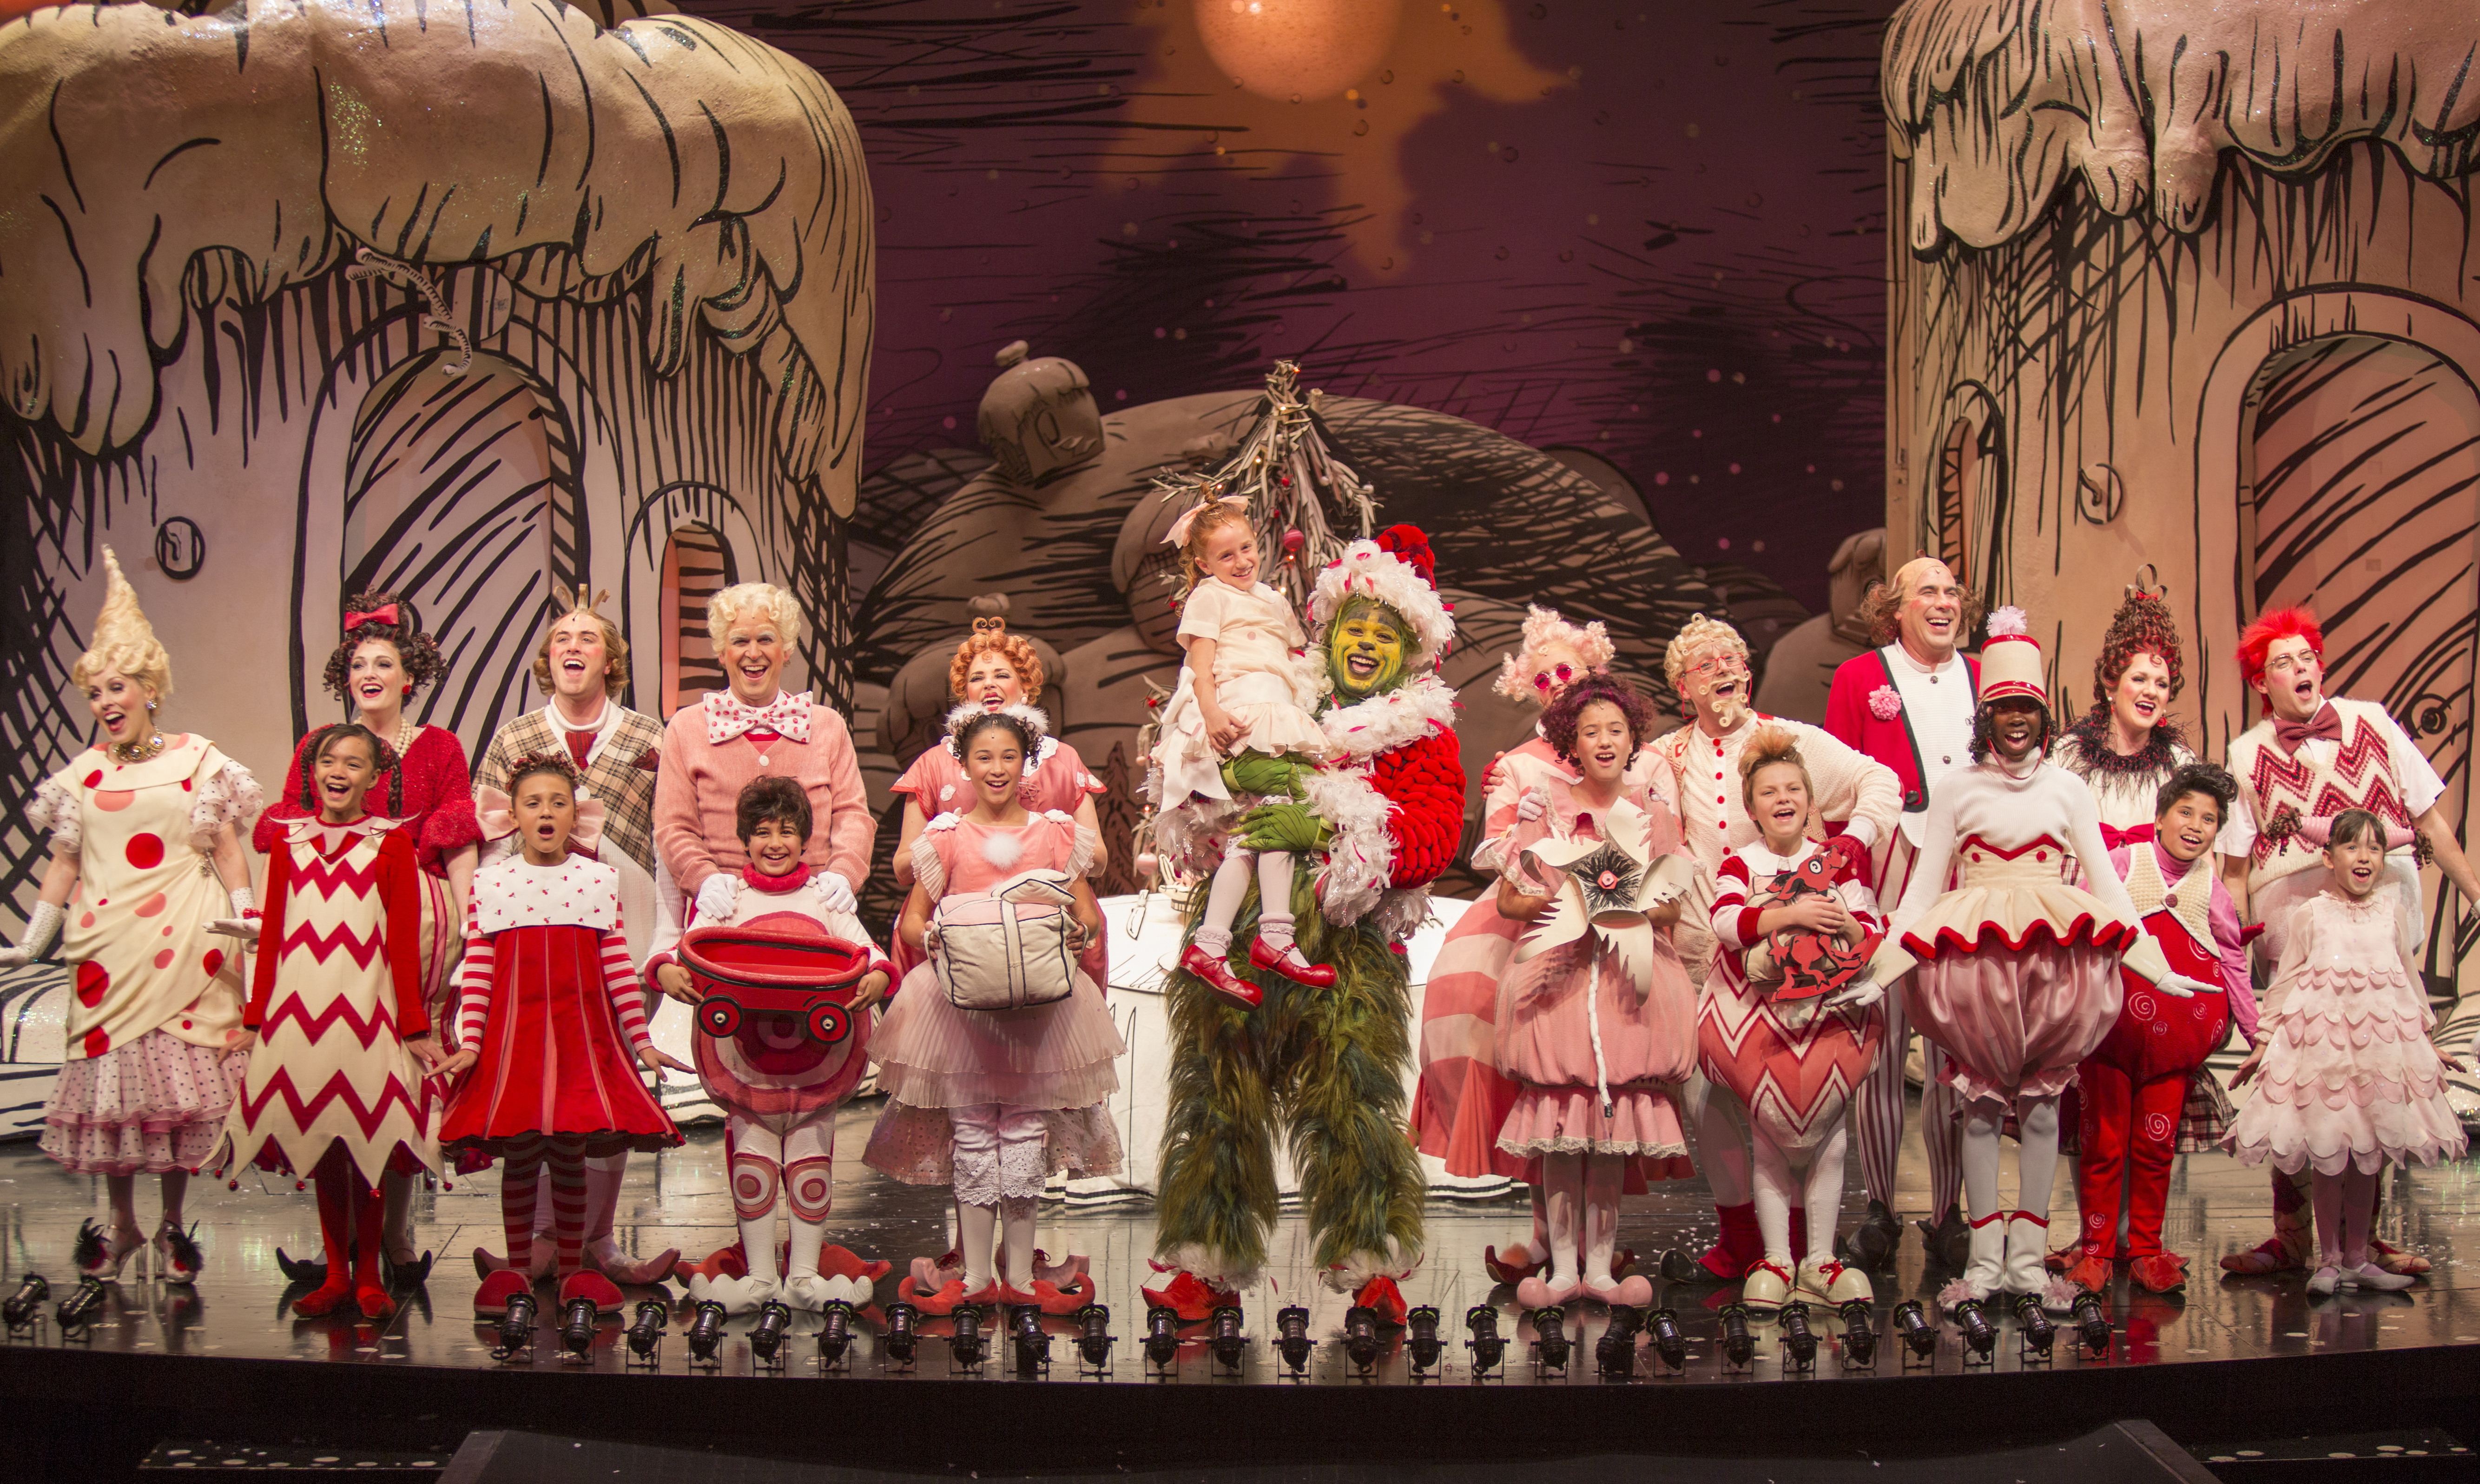 The cast of the 18th annual production of Dr. Seuss' How the Grinch Stole Christmas!, directed by James Vásquez. The annual holiday musical runs Nov. 7 - Dec. 26, 2015 at The Old Globe. Photo by Jim Cox.